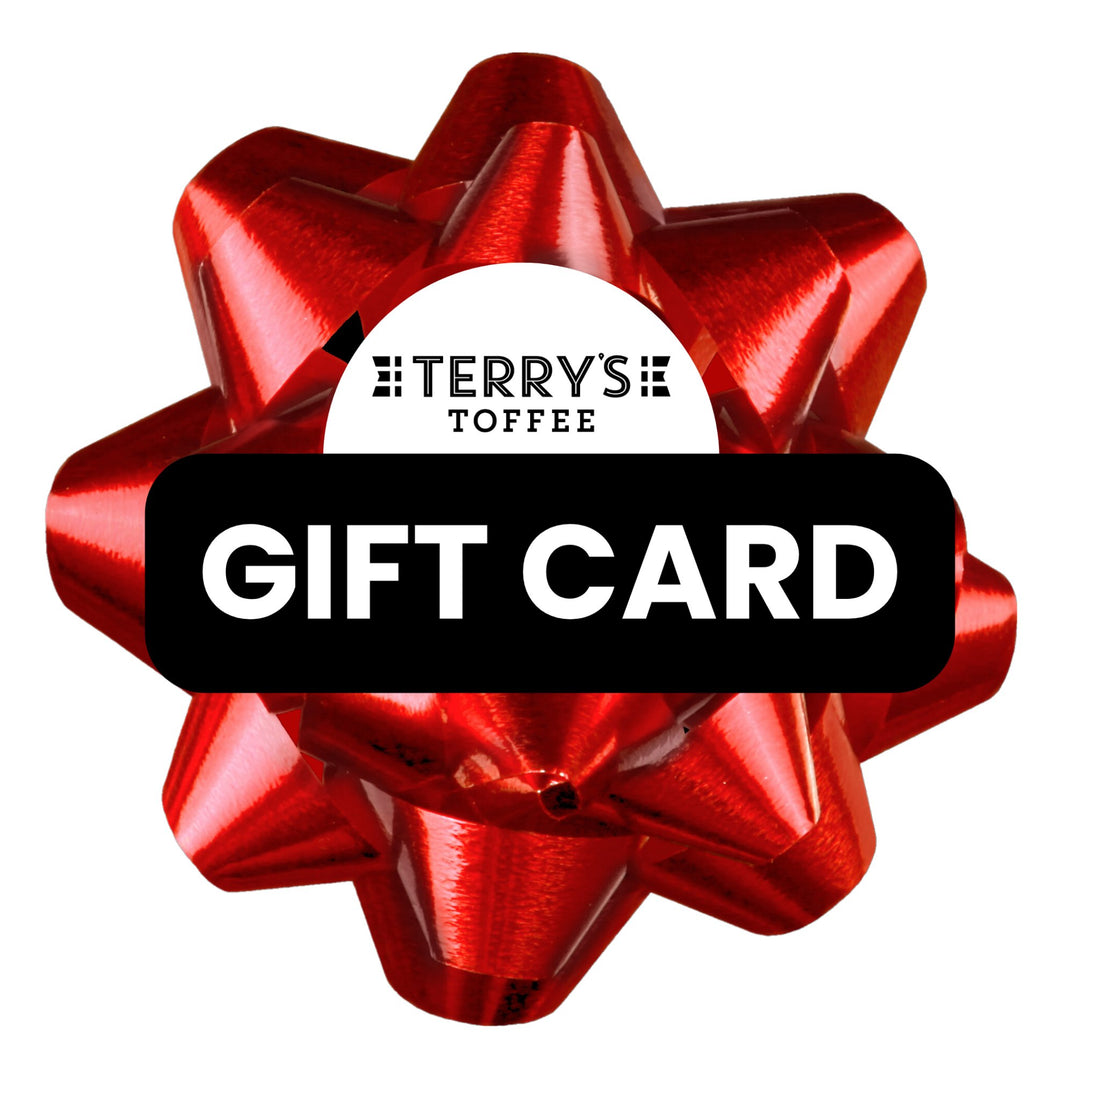 Terry's Toffee Gift Card - Terry's Toffee